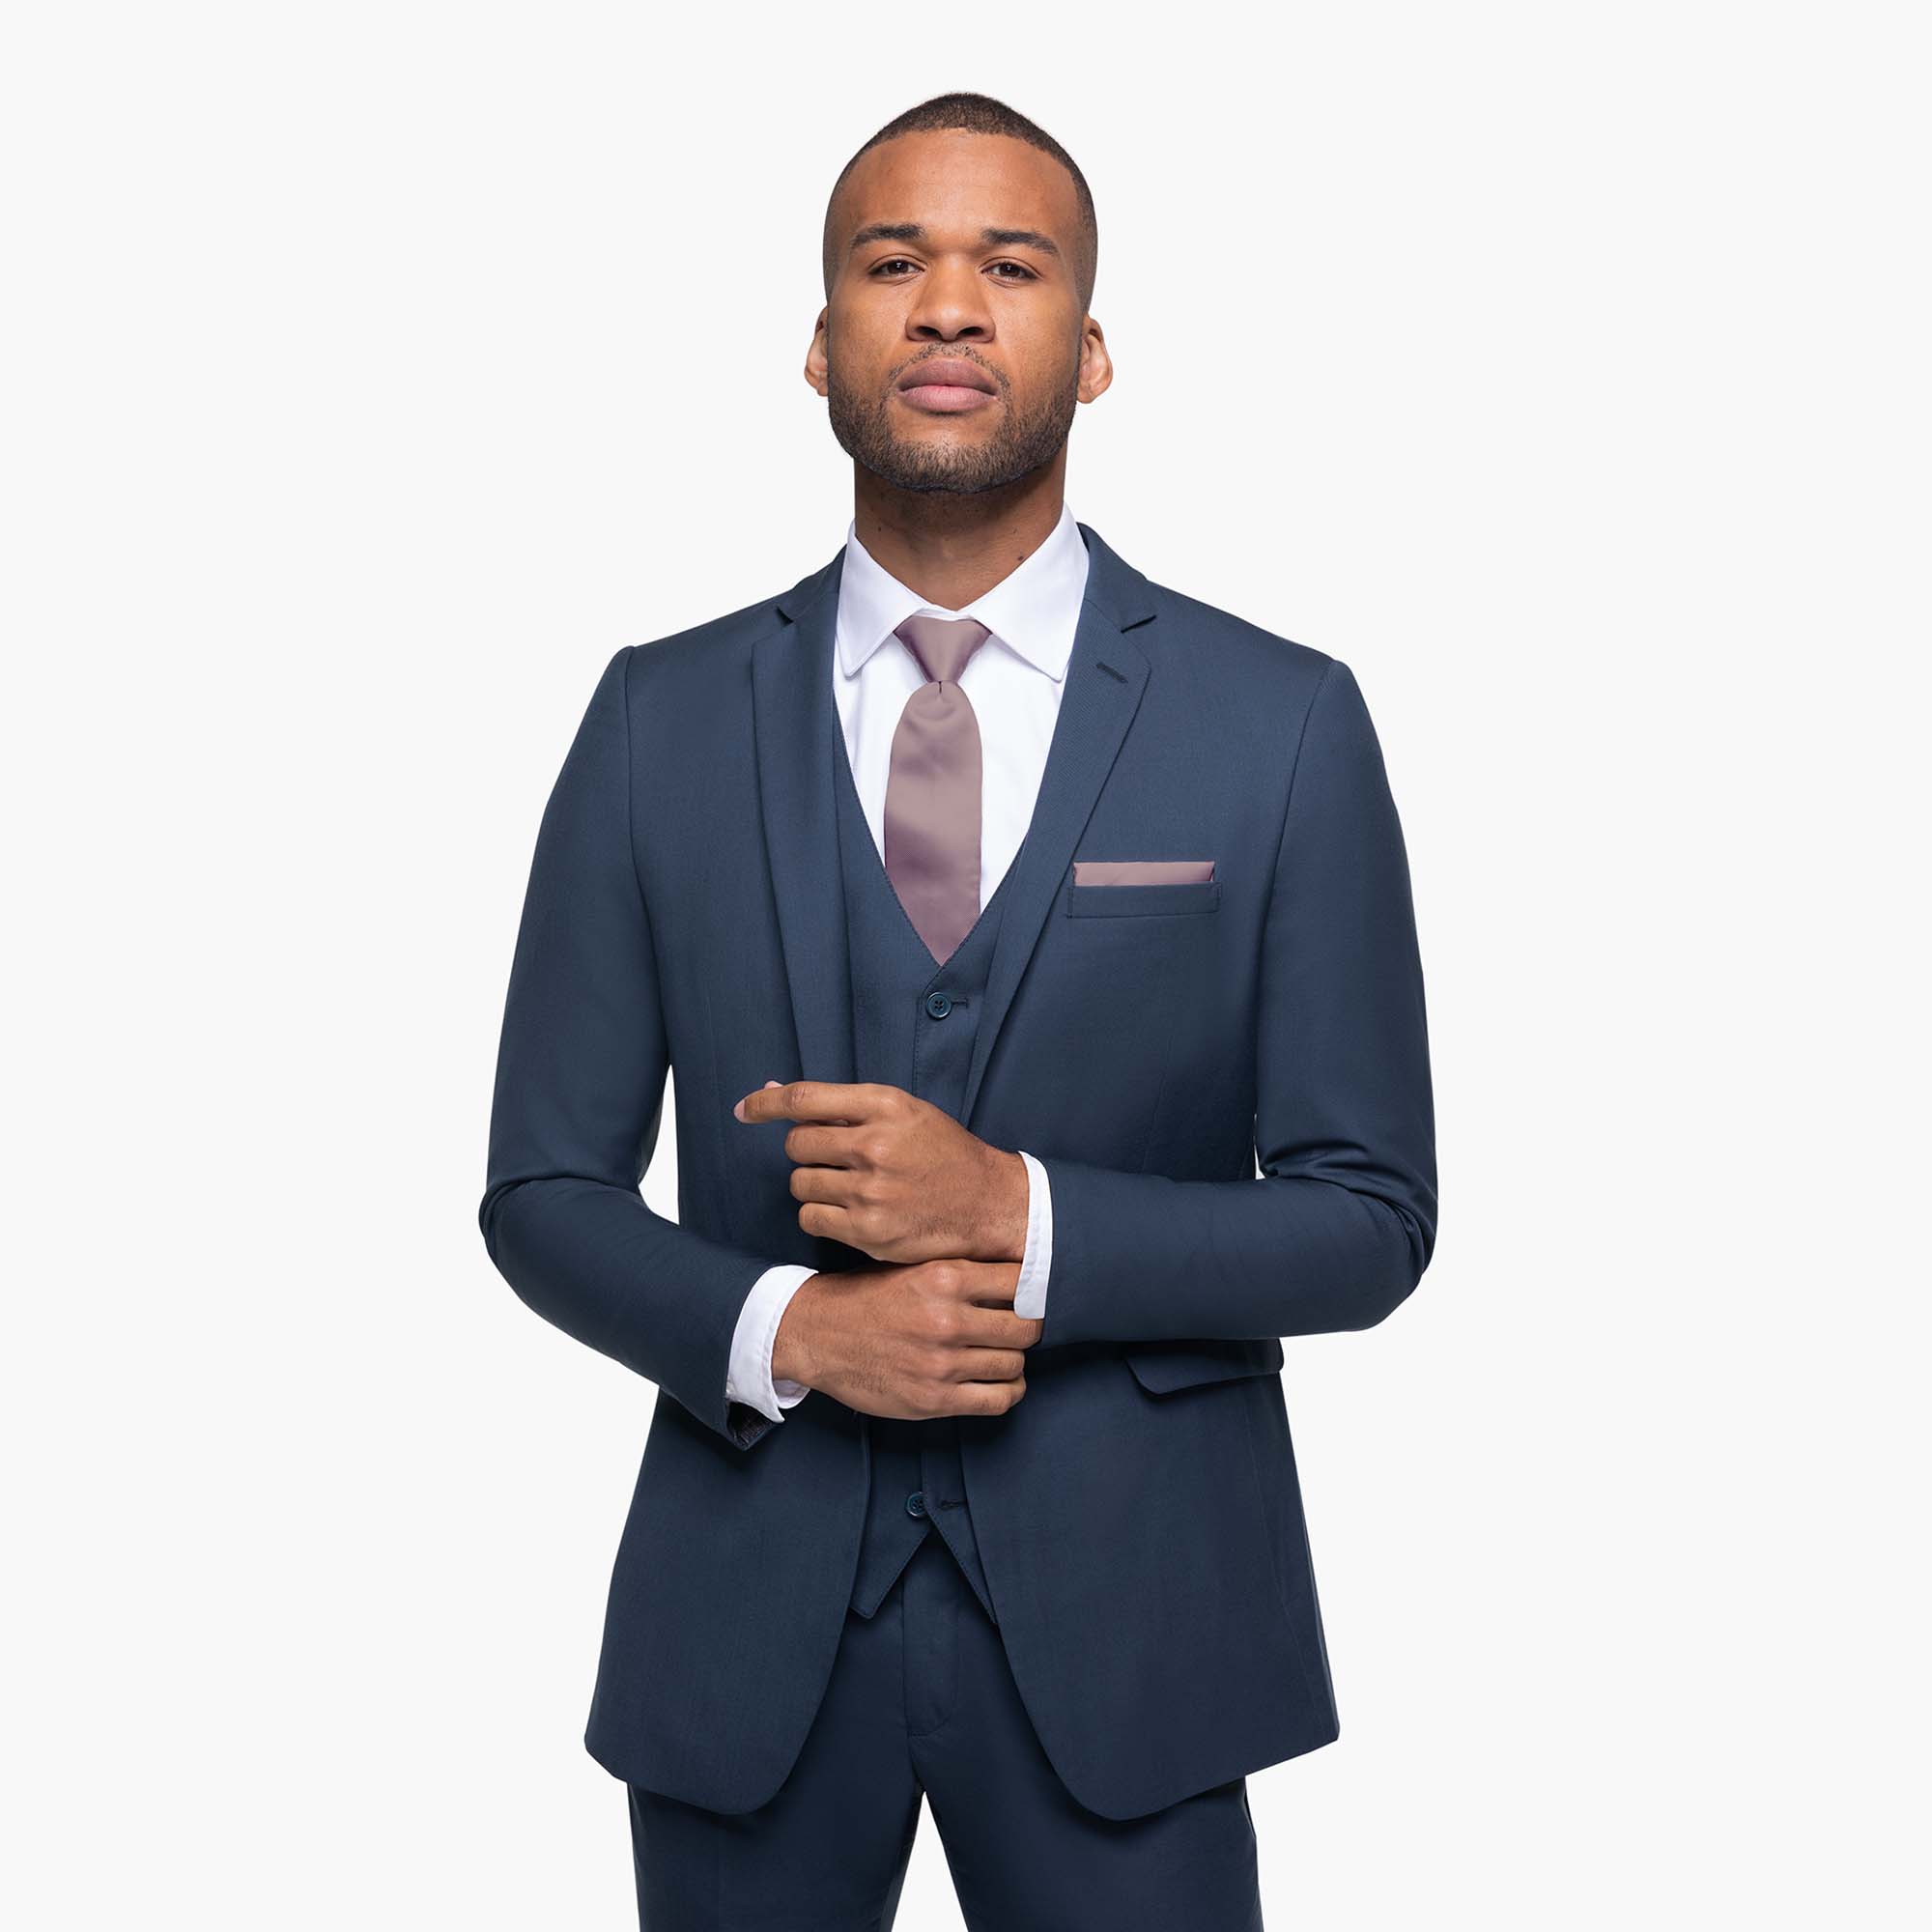 The Best Suits & Tuxedos for Men - Free Home Try-On